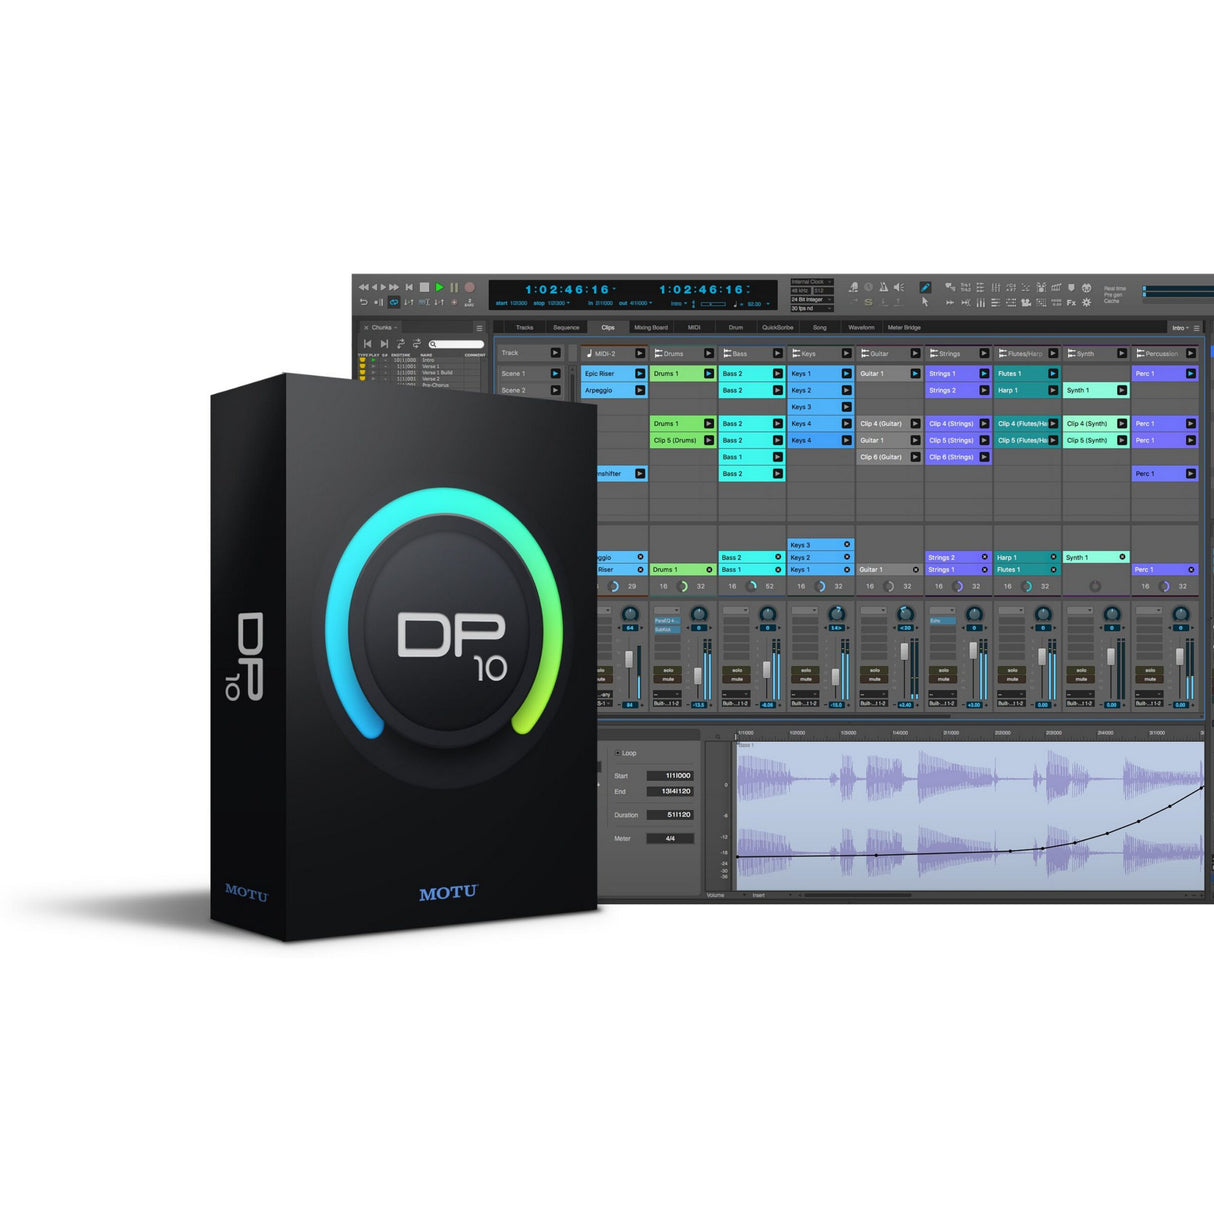 MOTU DP10 Competitive Upgrade, Audio Workstation Software with MIDI Sequencing